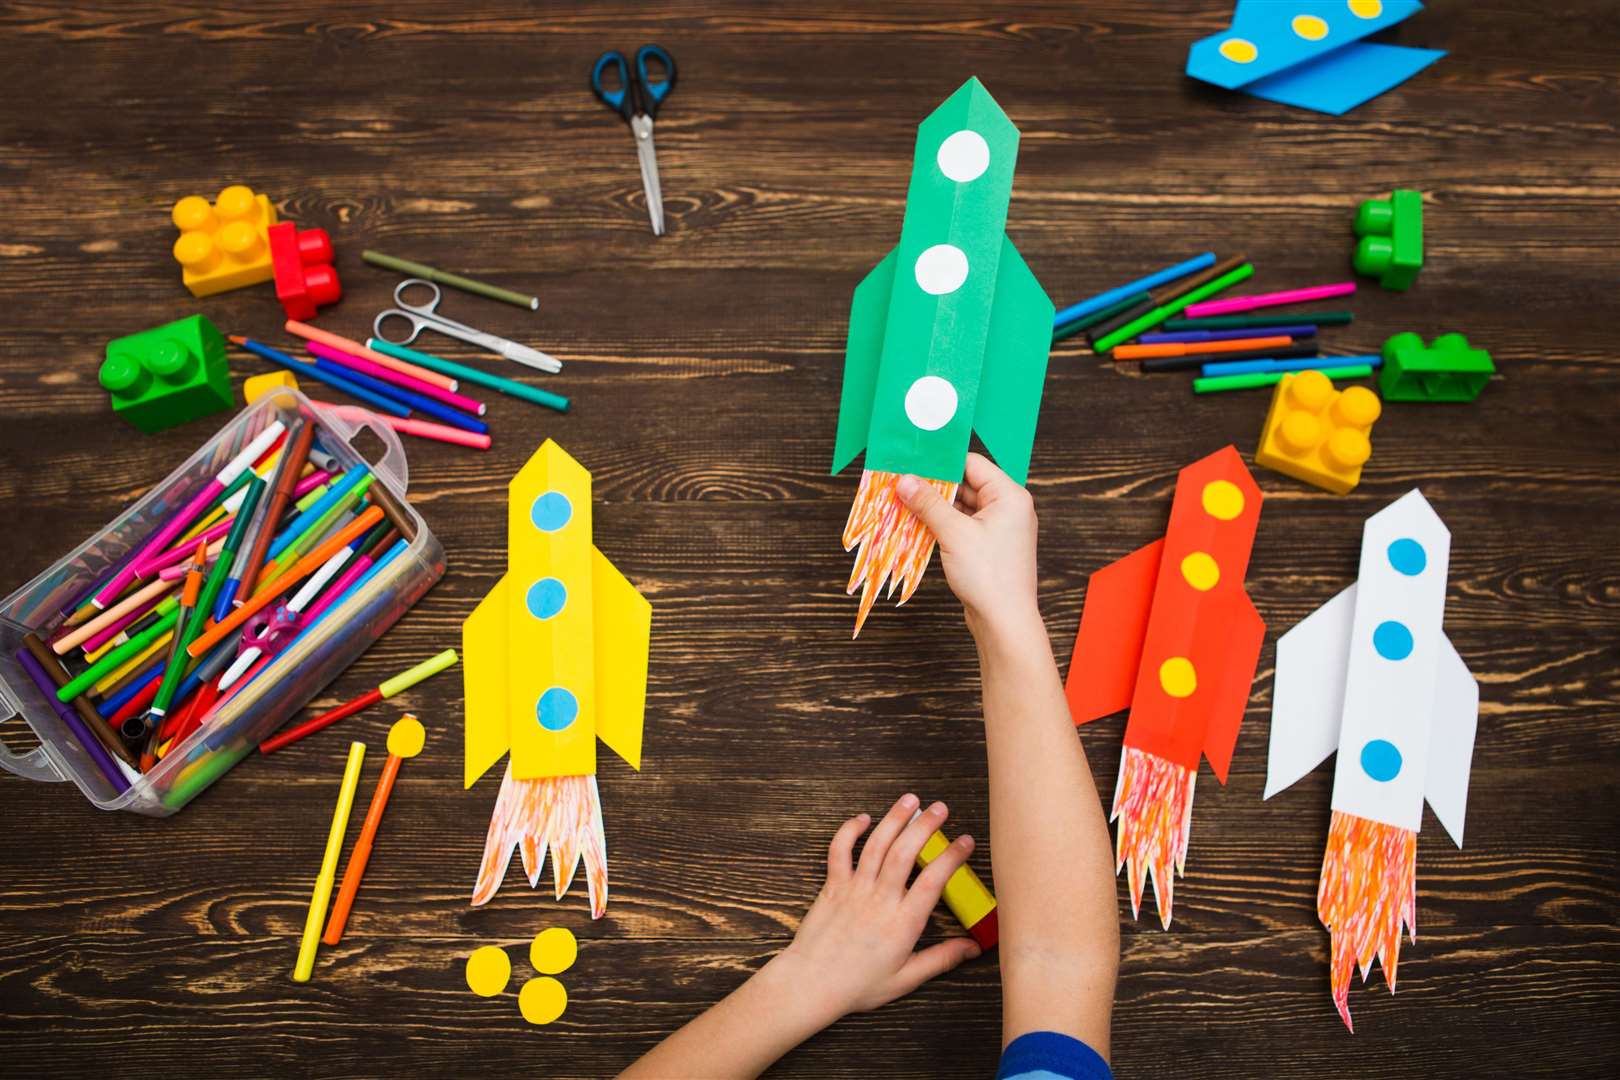 Use items from the recycling bin or cut up some old paper to make rockets. Picture: iStock/PA